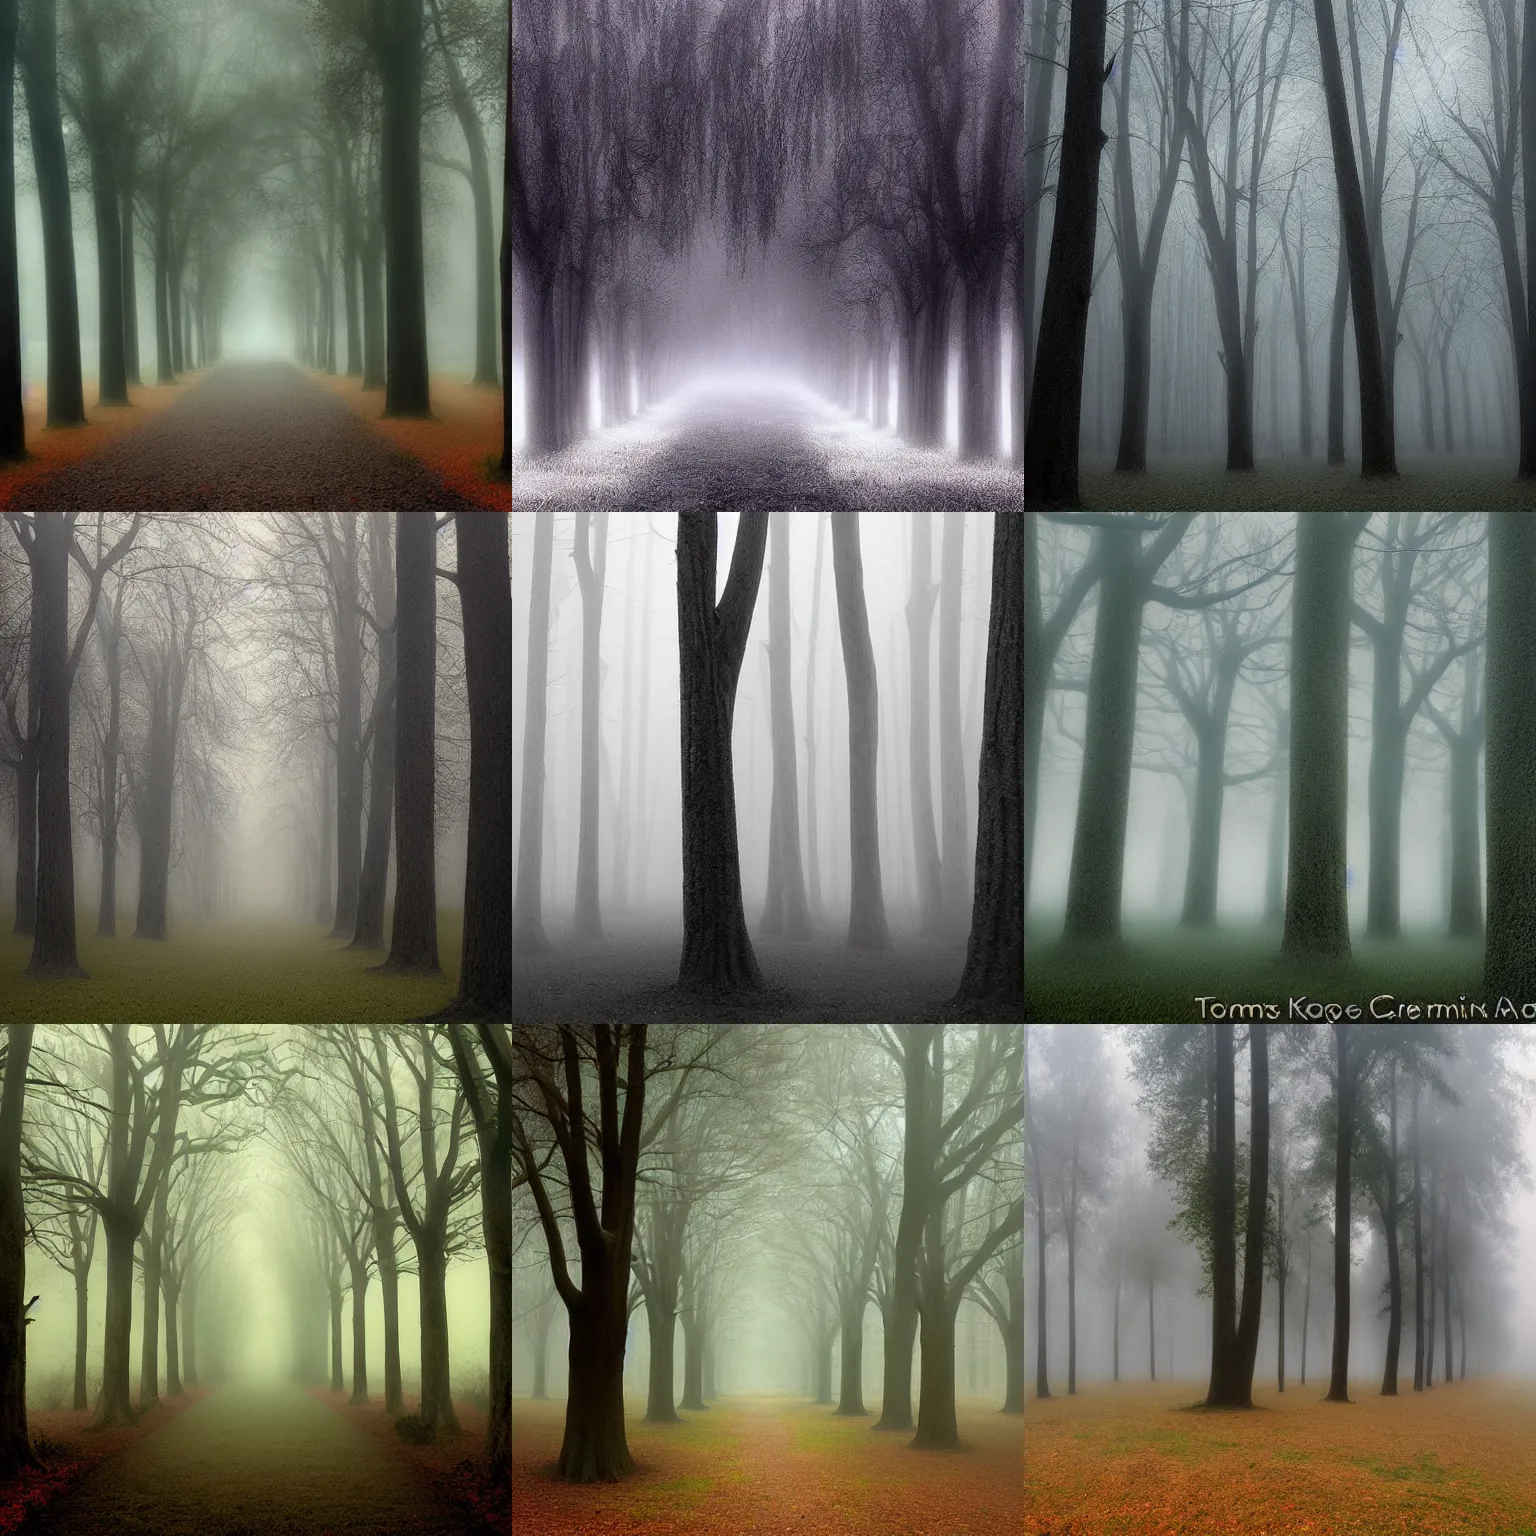 Prompt: a spooky grove of trees by thomas kinkade, foggy, eerie